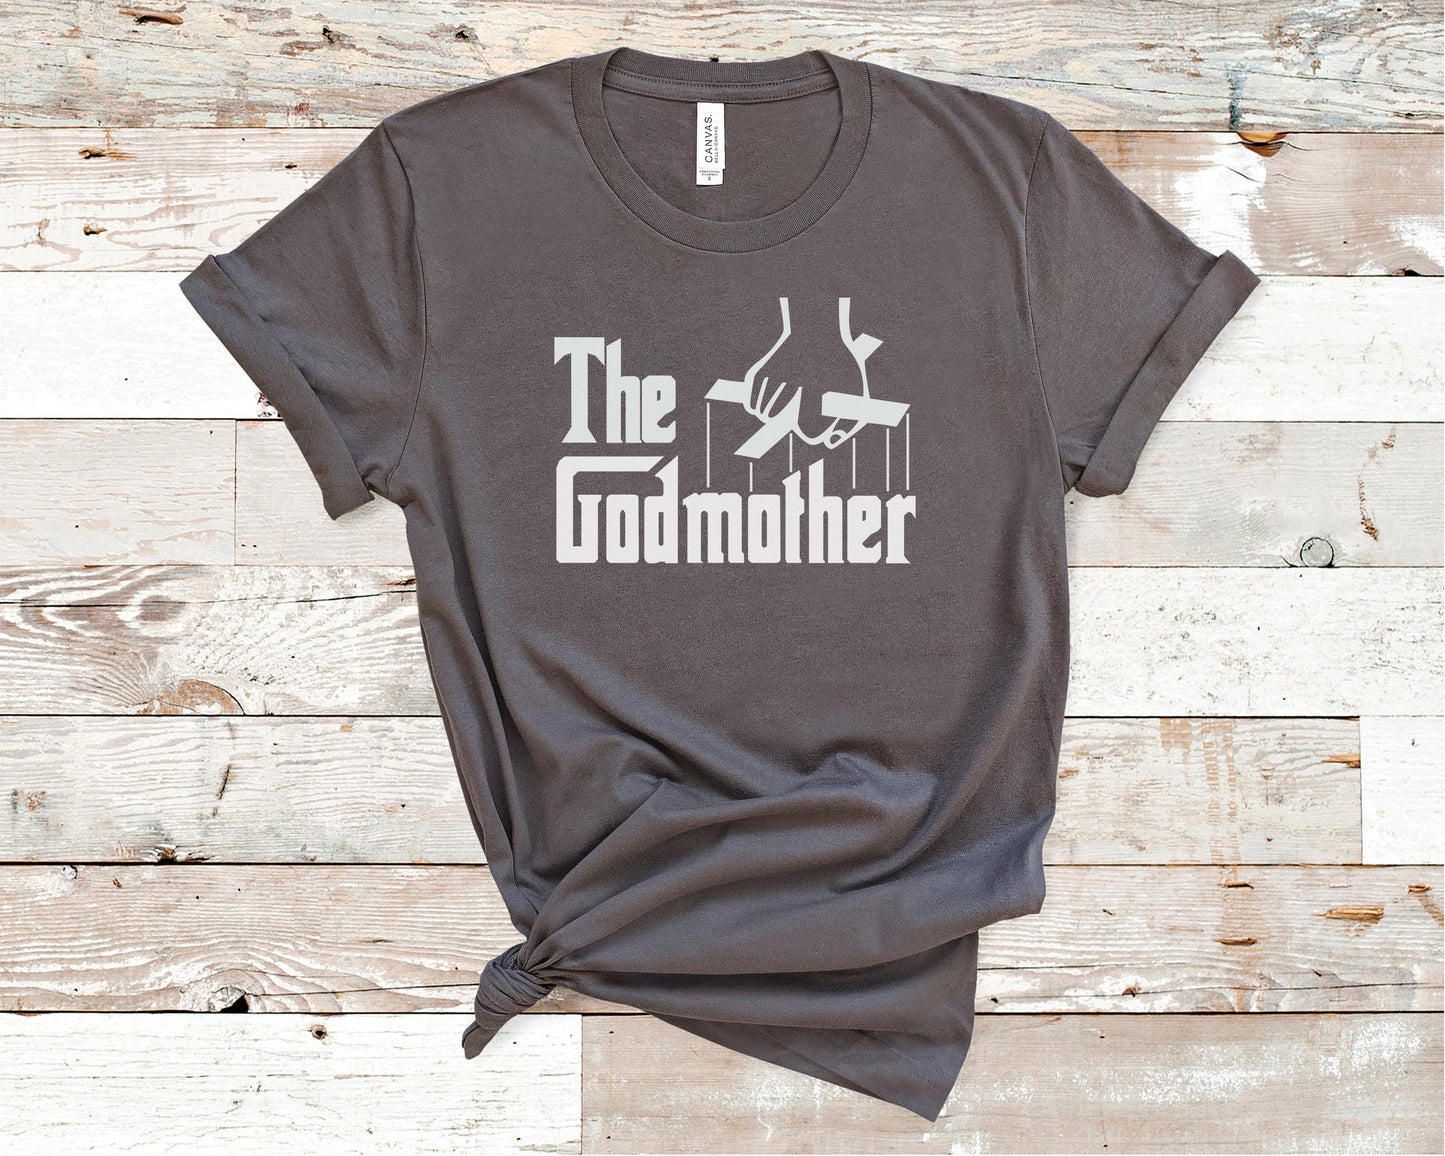 The Godmother - Pregnancy Announcement